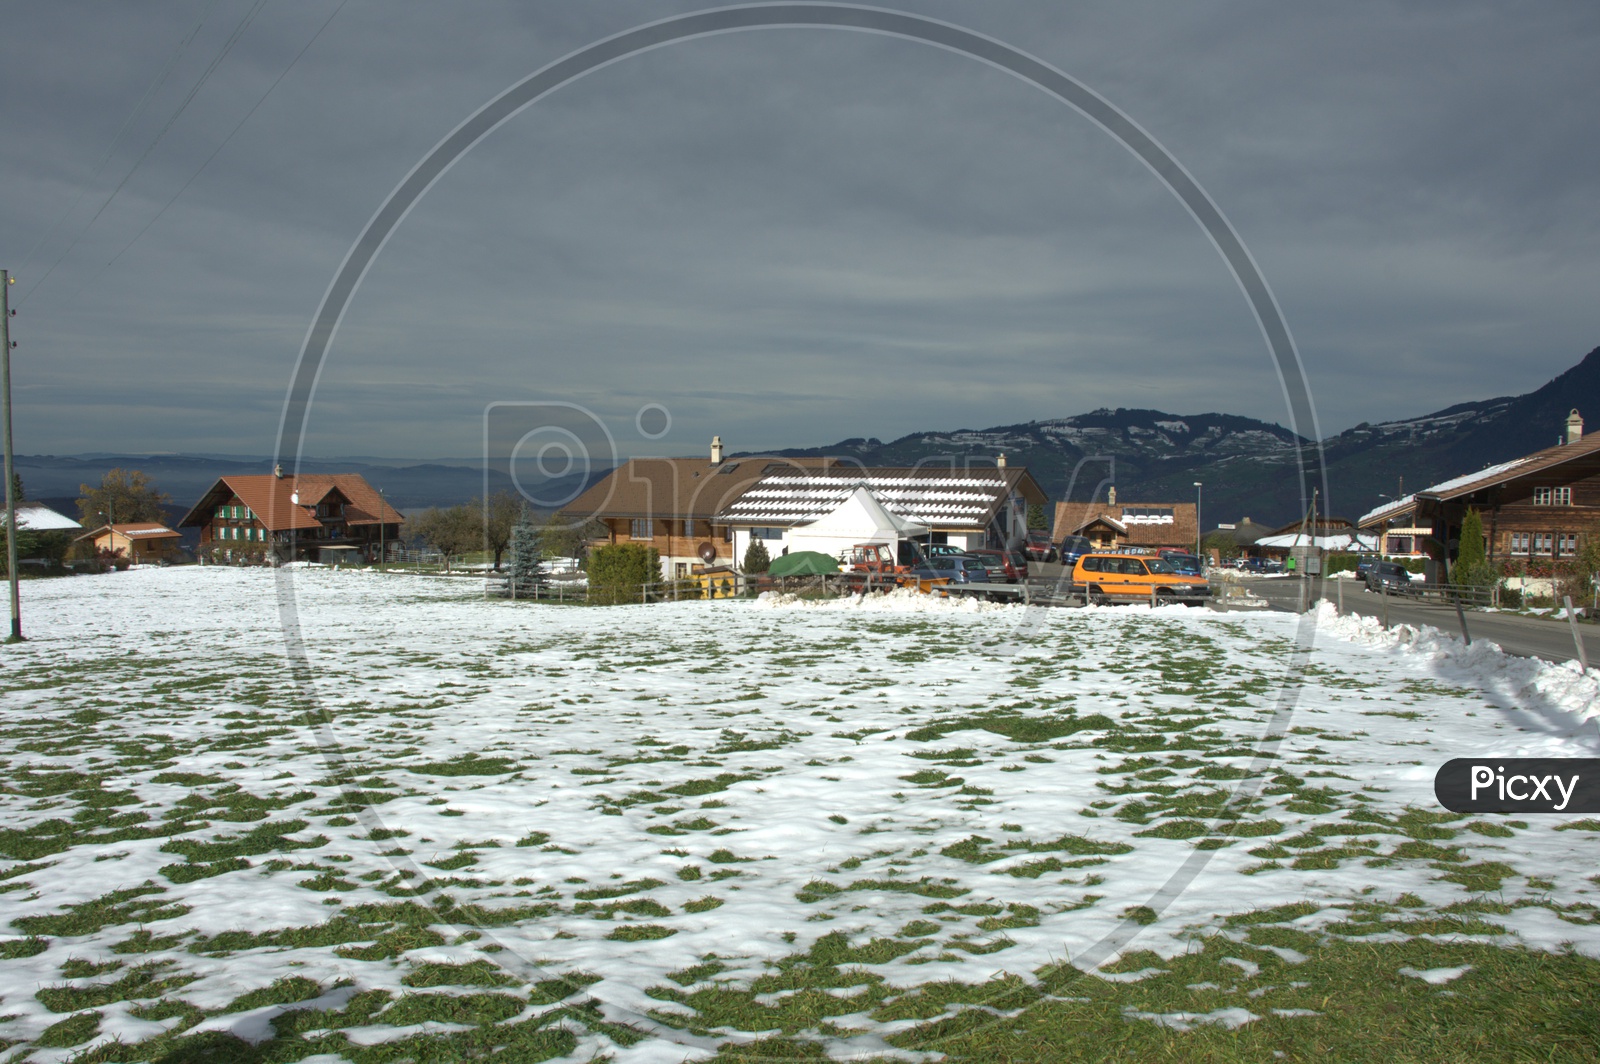 Snow on the grass alongside the wooden houses